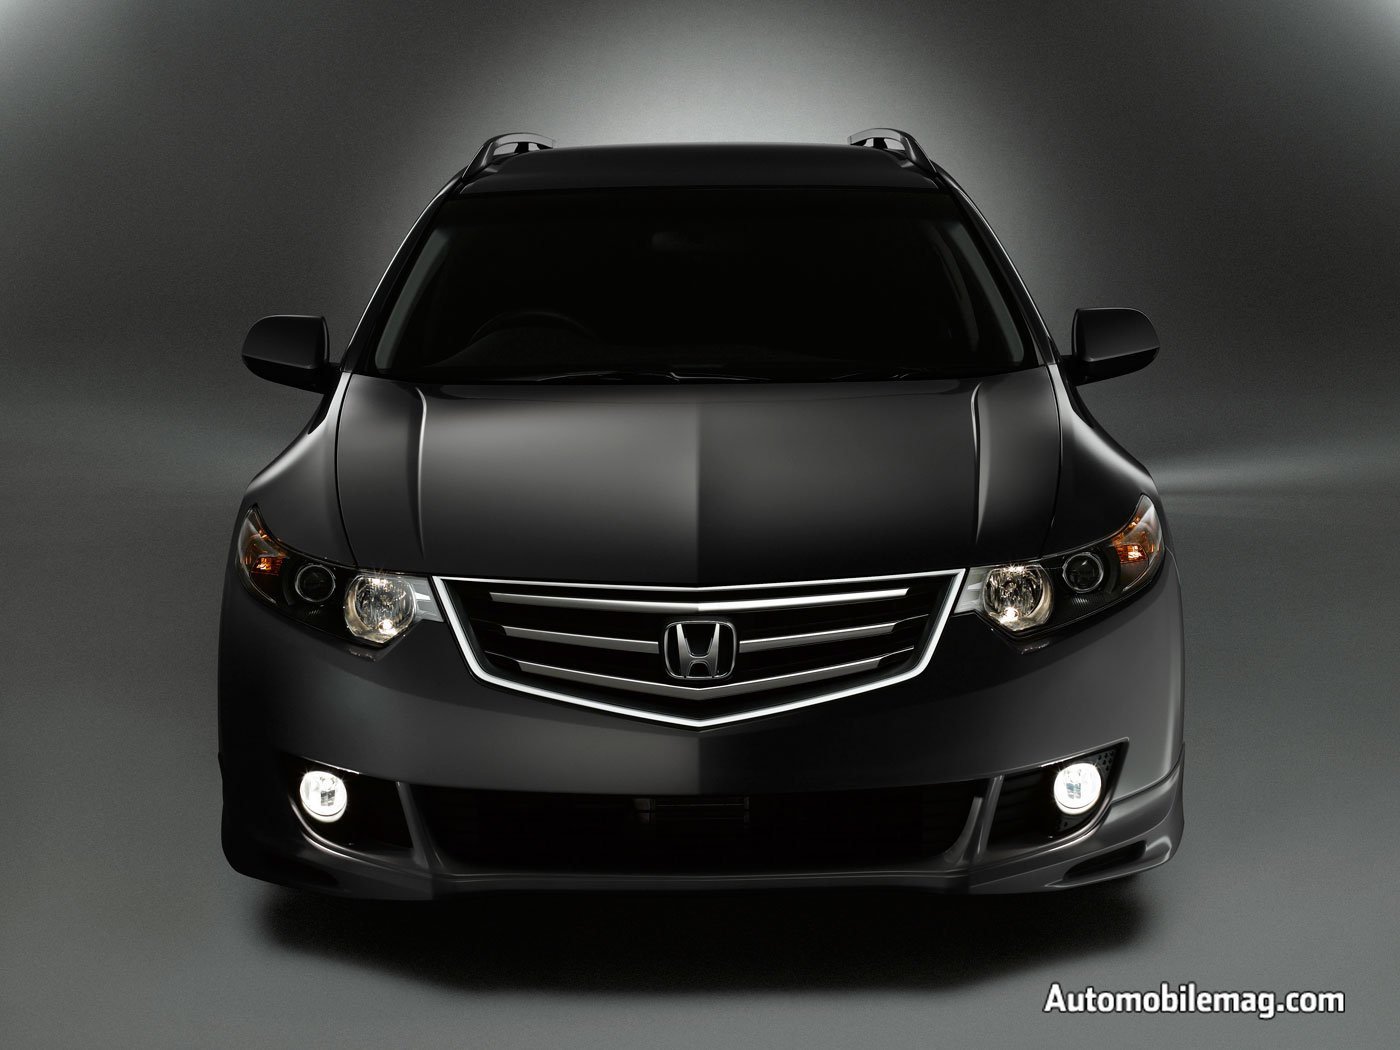 Honda Accord Wallpapers 6286 Hd Wallpapers in Cars   Imagescicom